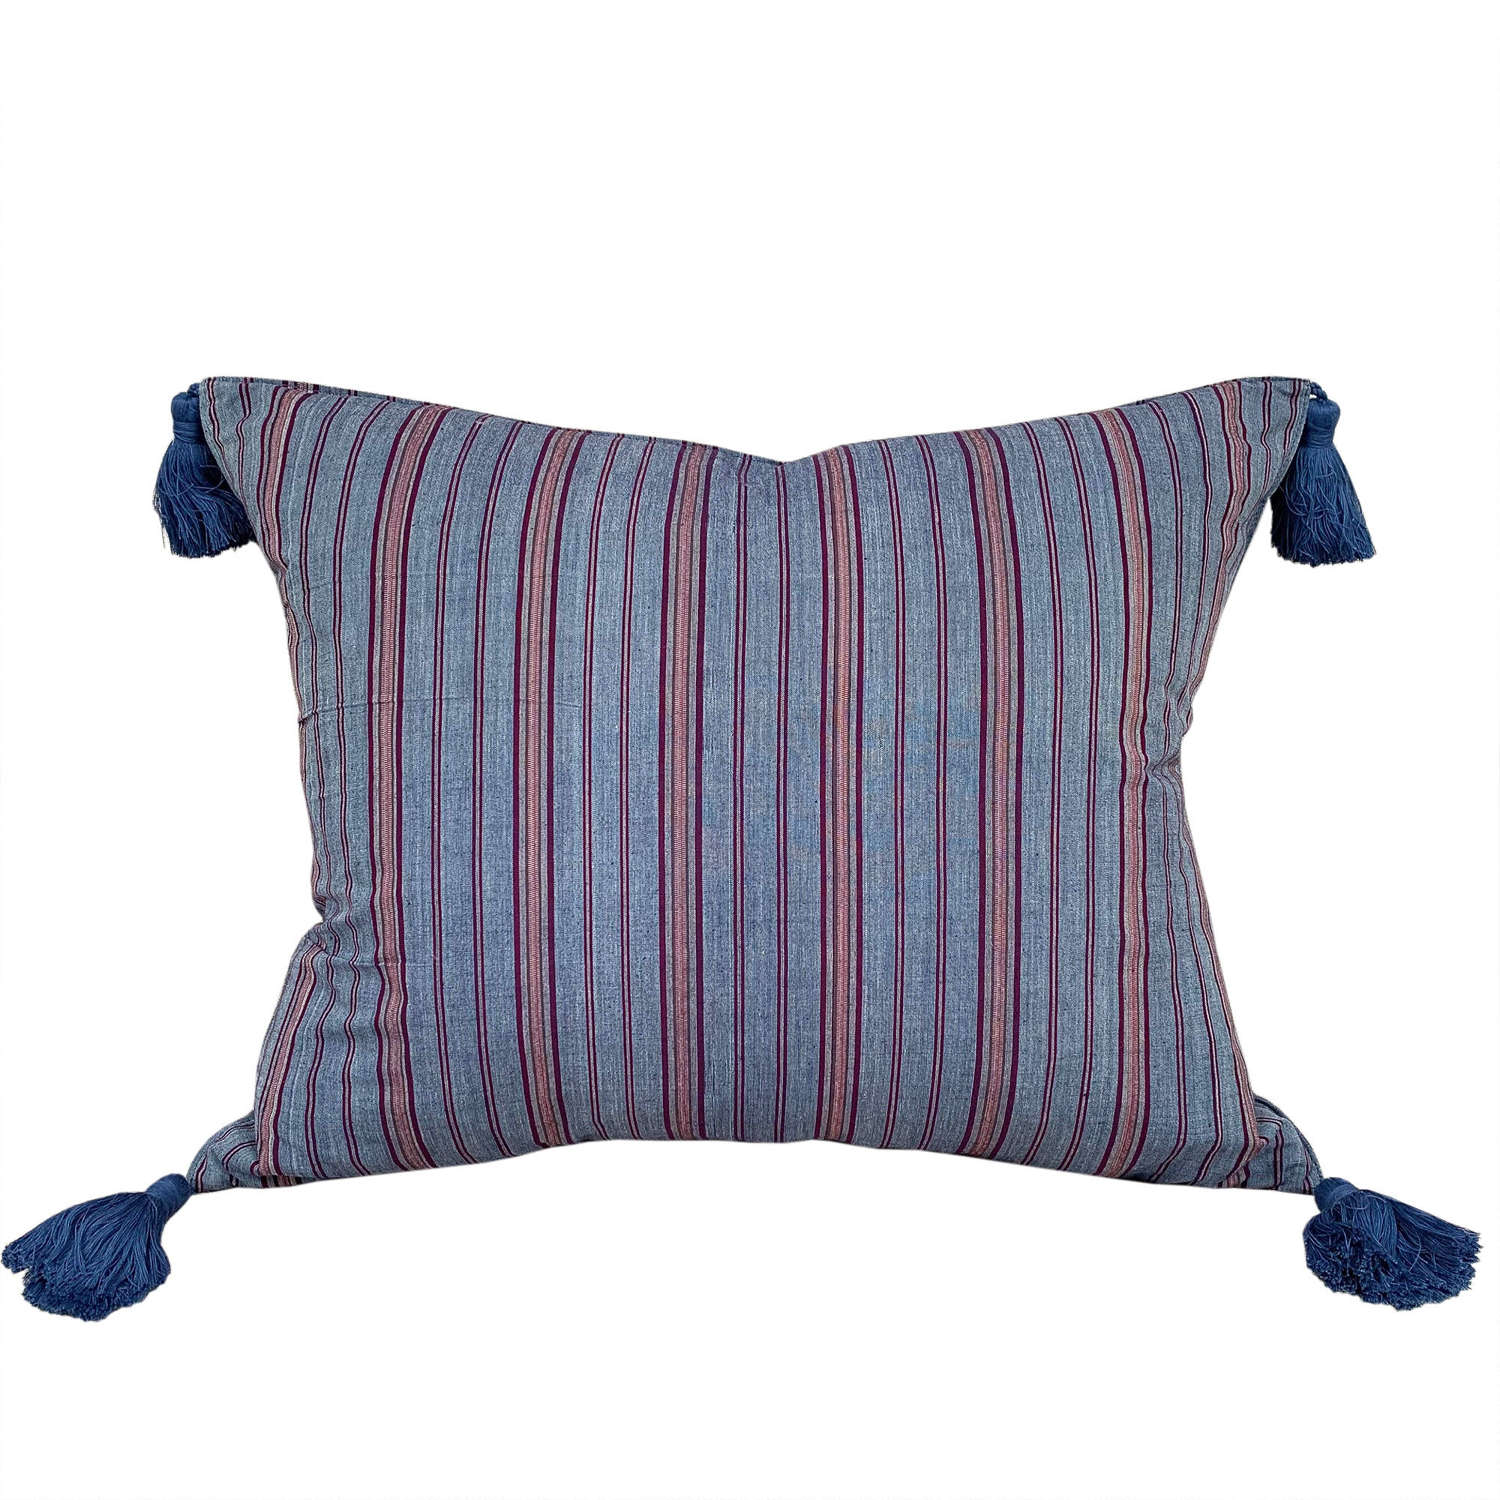 Lombok cushions blue and red stripes